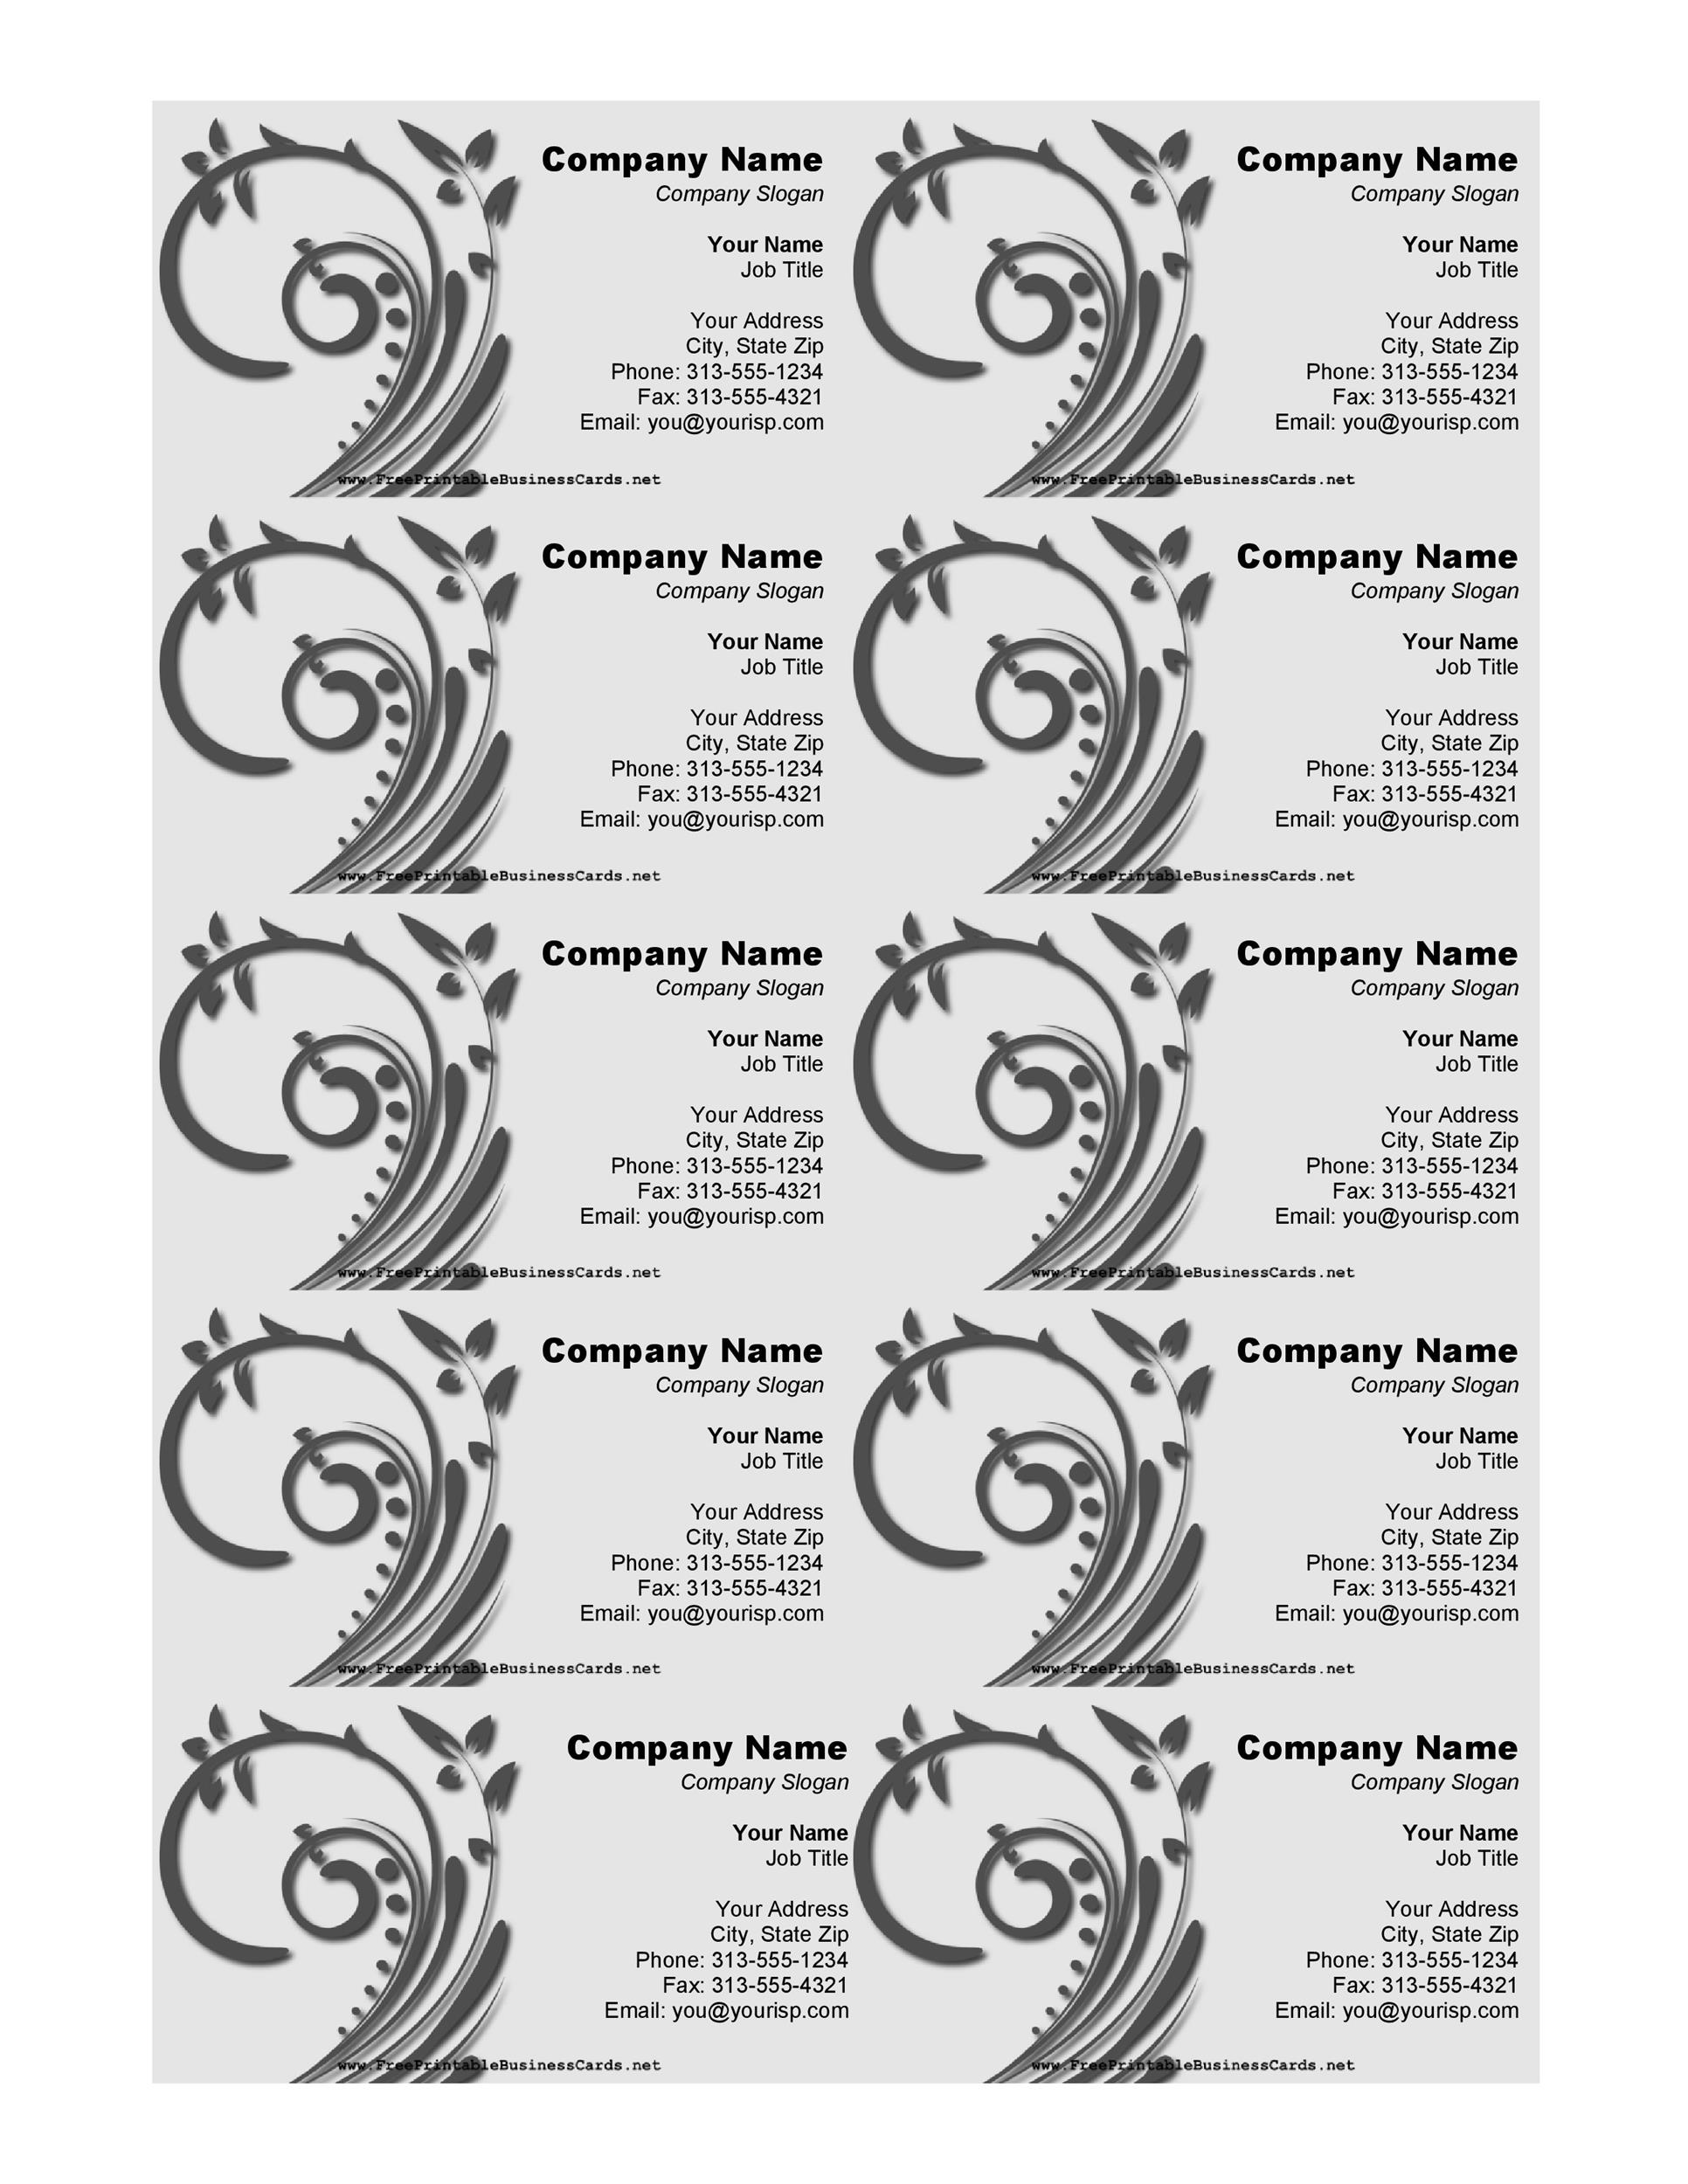 pdf template for business cards 4